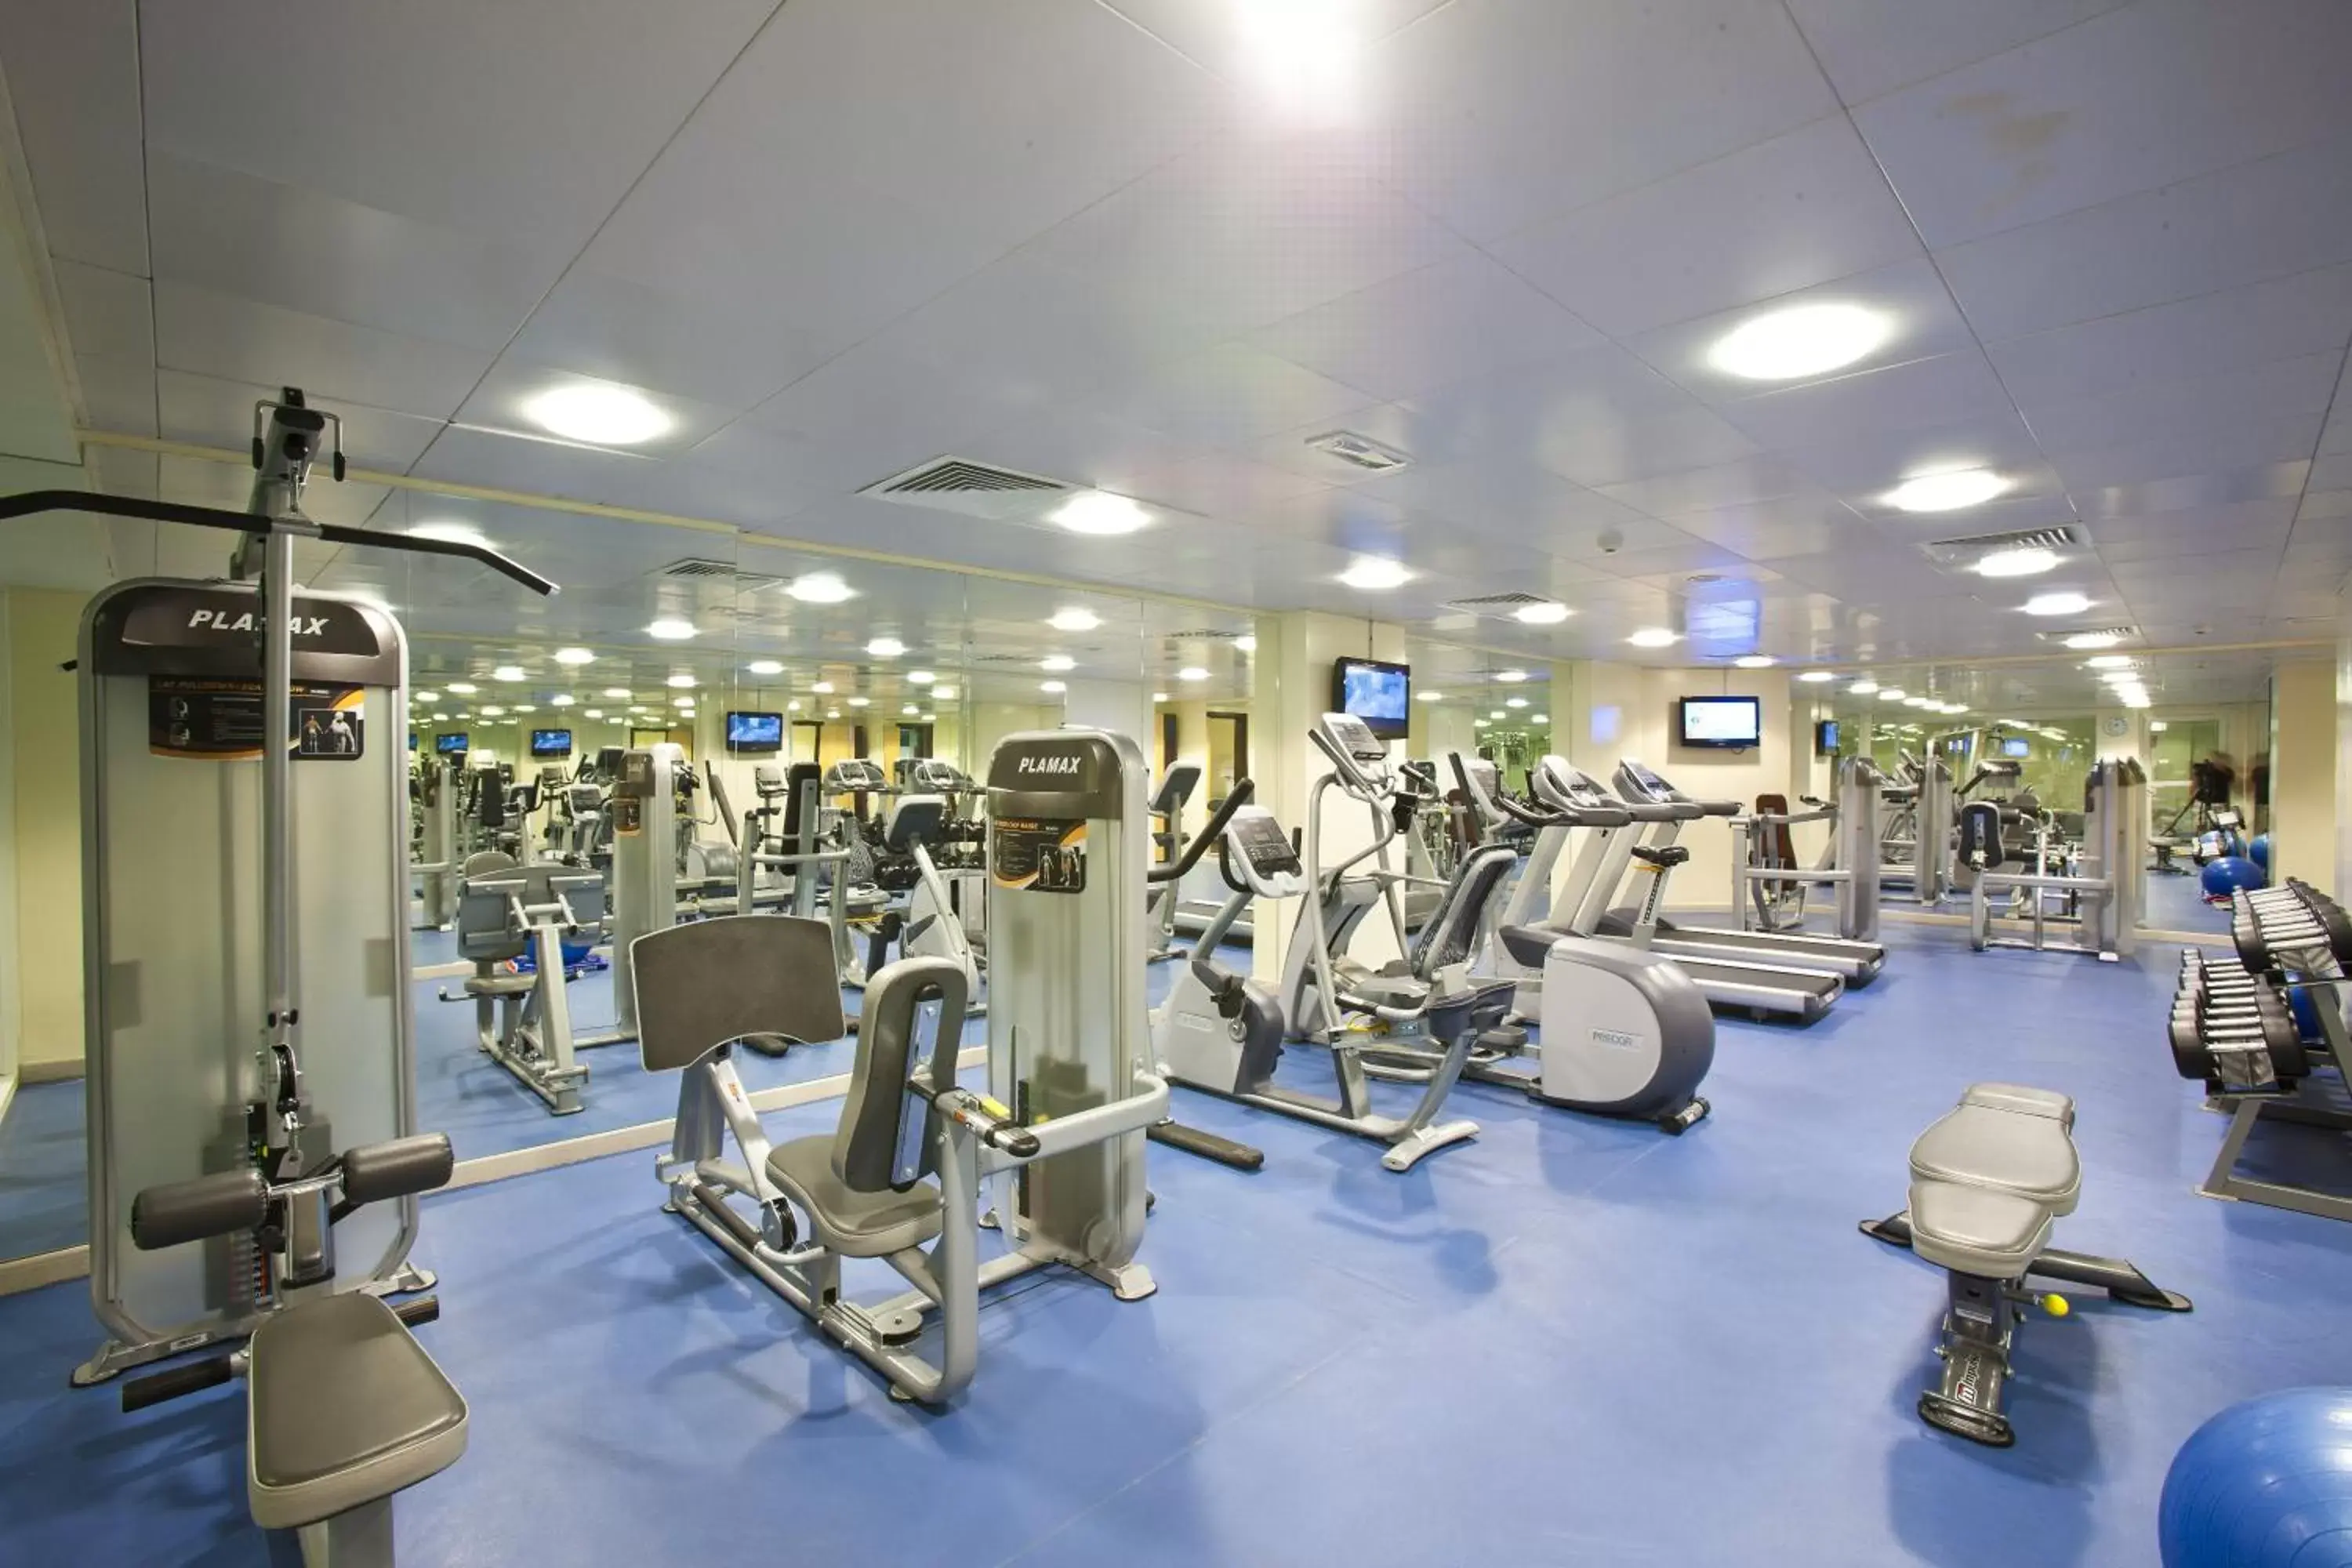 Fitness centre/facilities, Fitness Center/Facilities in Kingsgate Hotel Doha by Millennium Hotels.